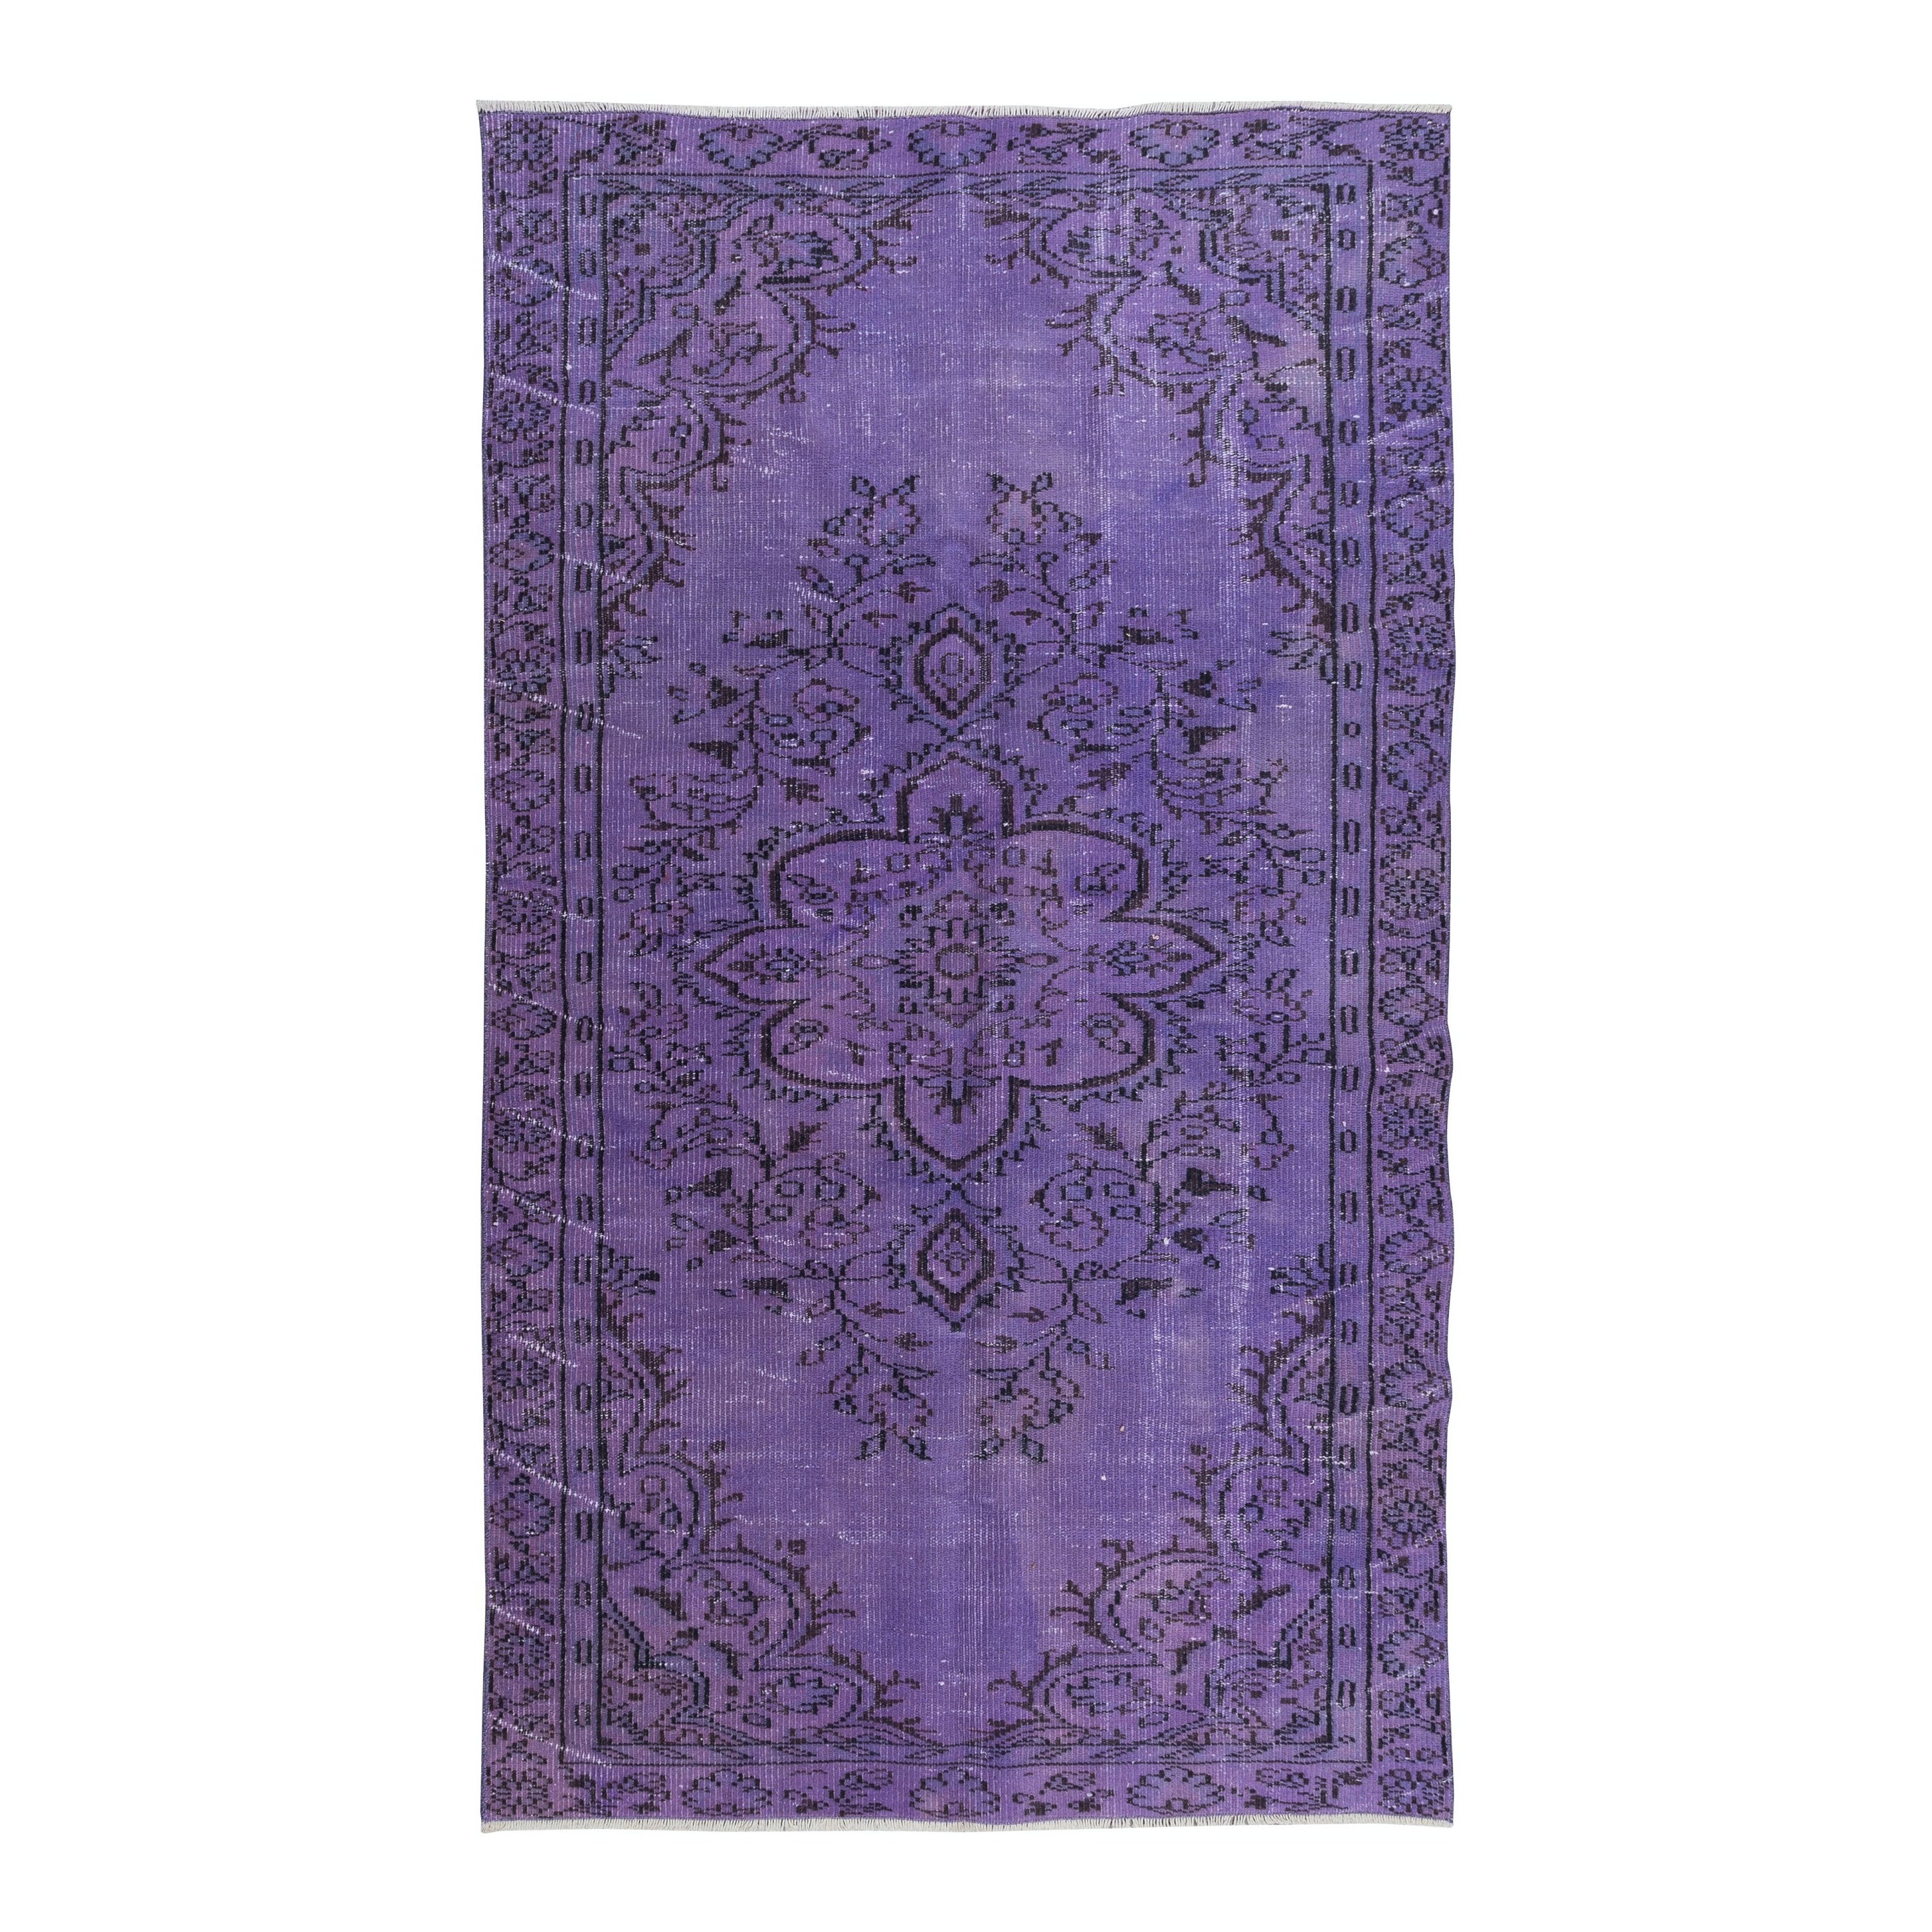 4.6x7.7 Ft Rustic Turkish Floral Pattern Area Rug. Twitch Purple Handmade Carpet For Sale